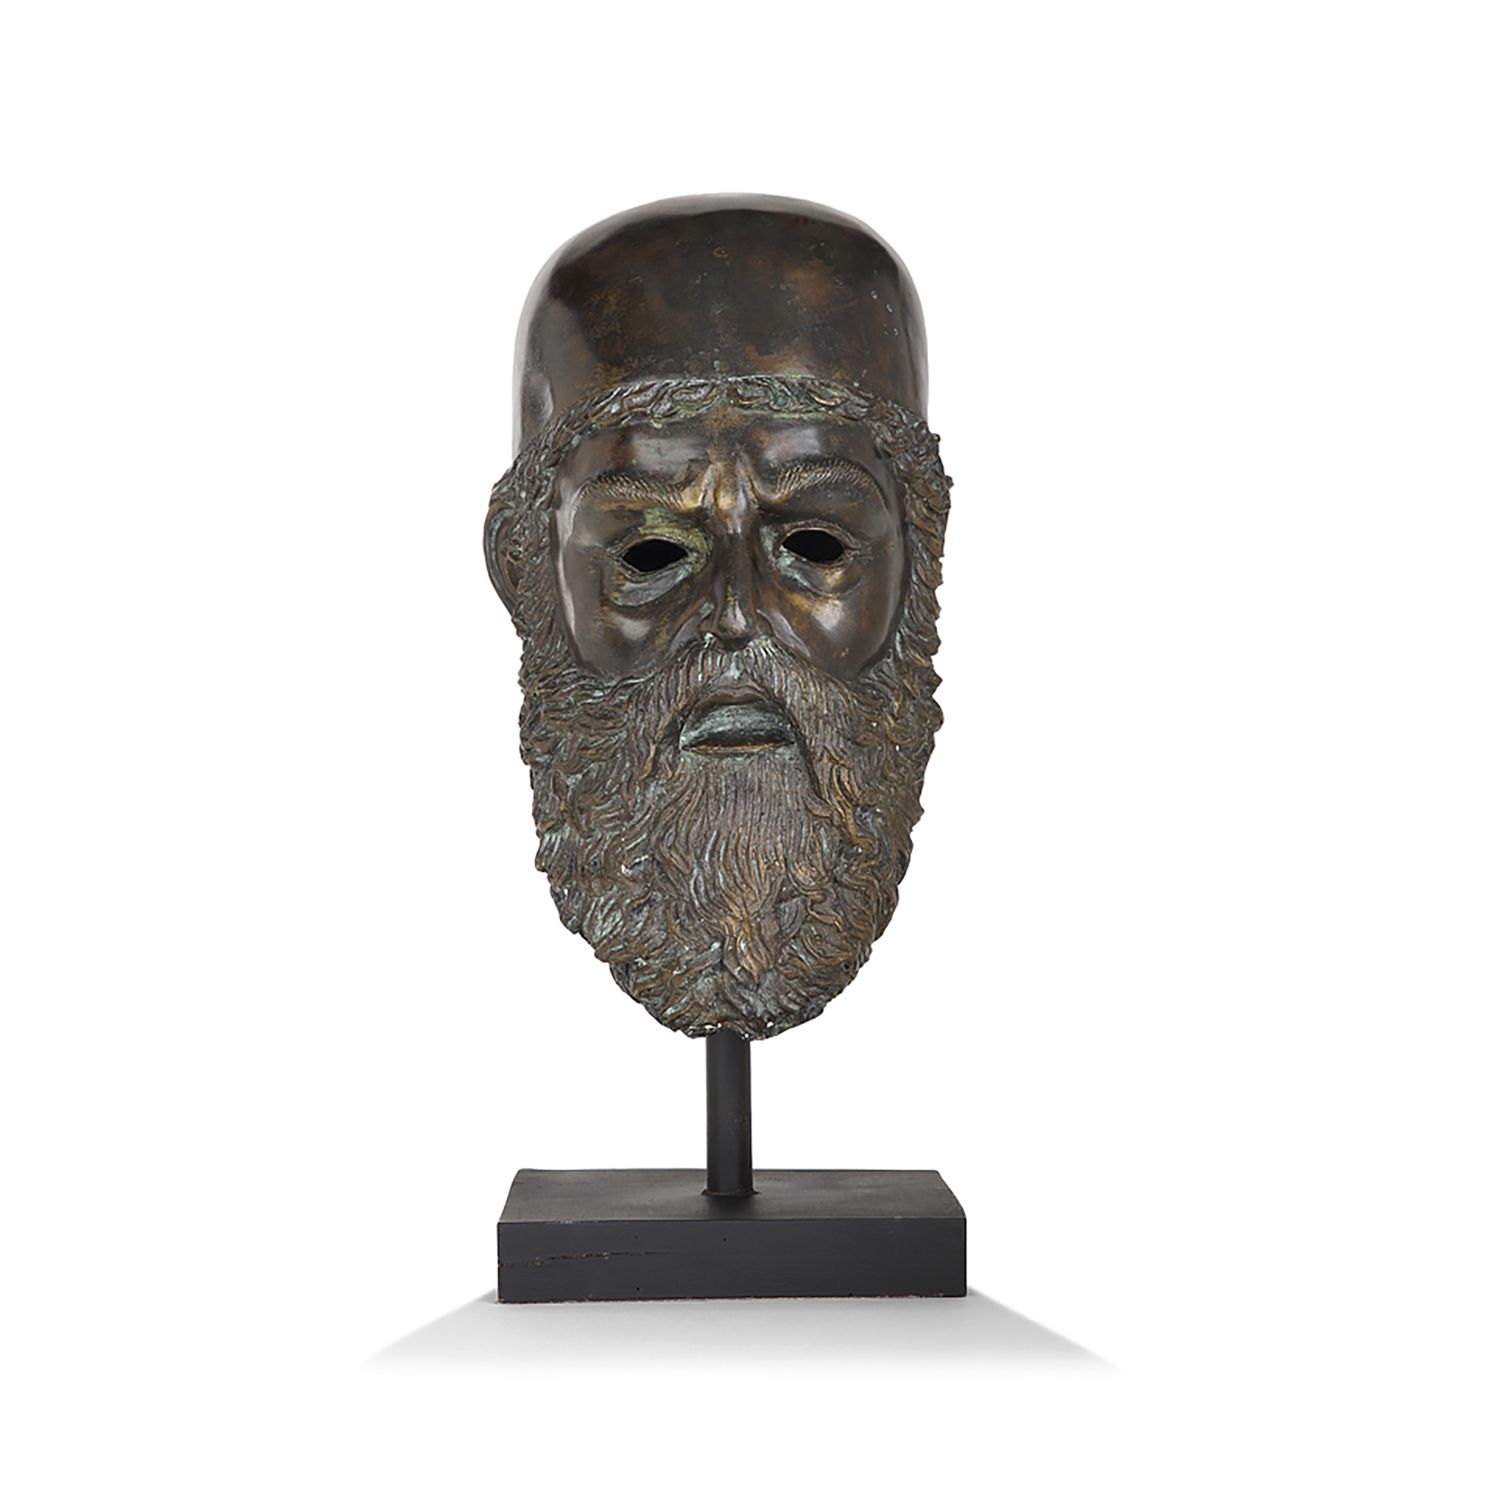 Null PIERRE CHENET (20TH-19TH CENTURY)

HEAD OF A BEARDED MAN KNOWN AS 'PERICLES&hellip;